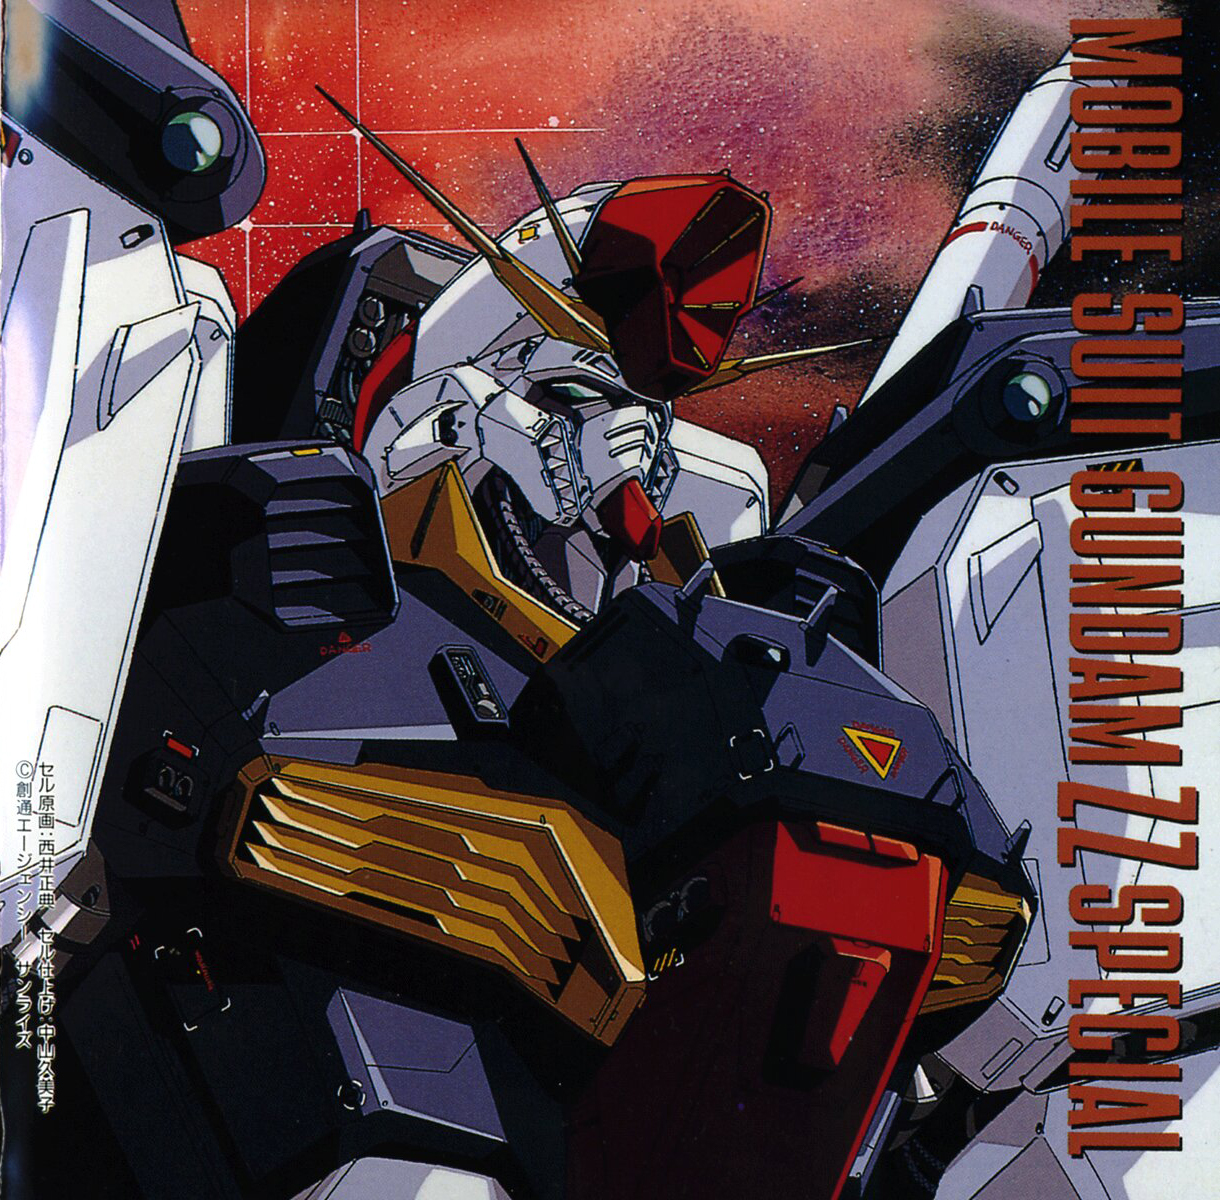 Release “MOBILE SUIT GUNDAM ZZ SPECIAL” by Various Artists - Tags 